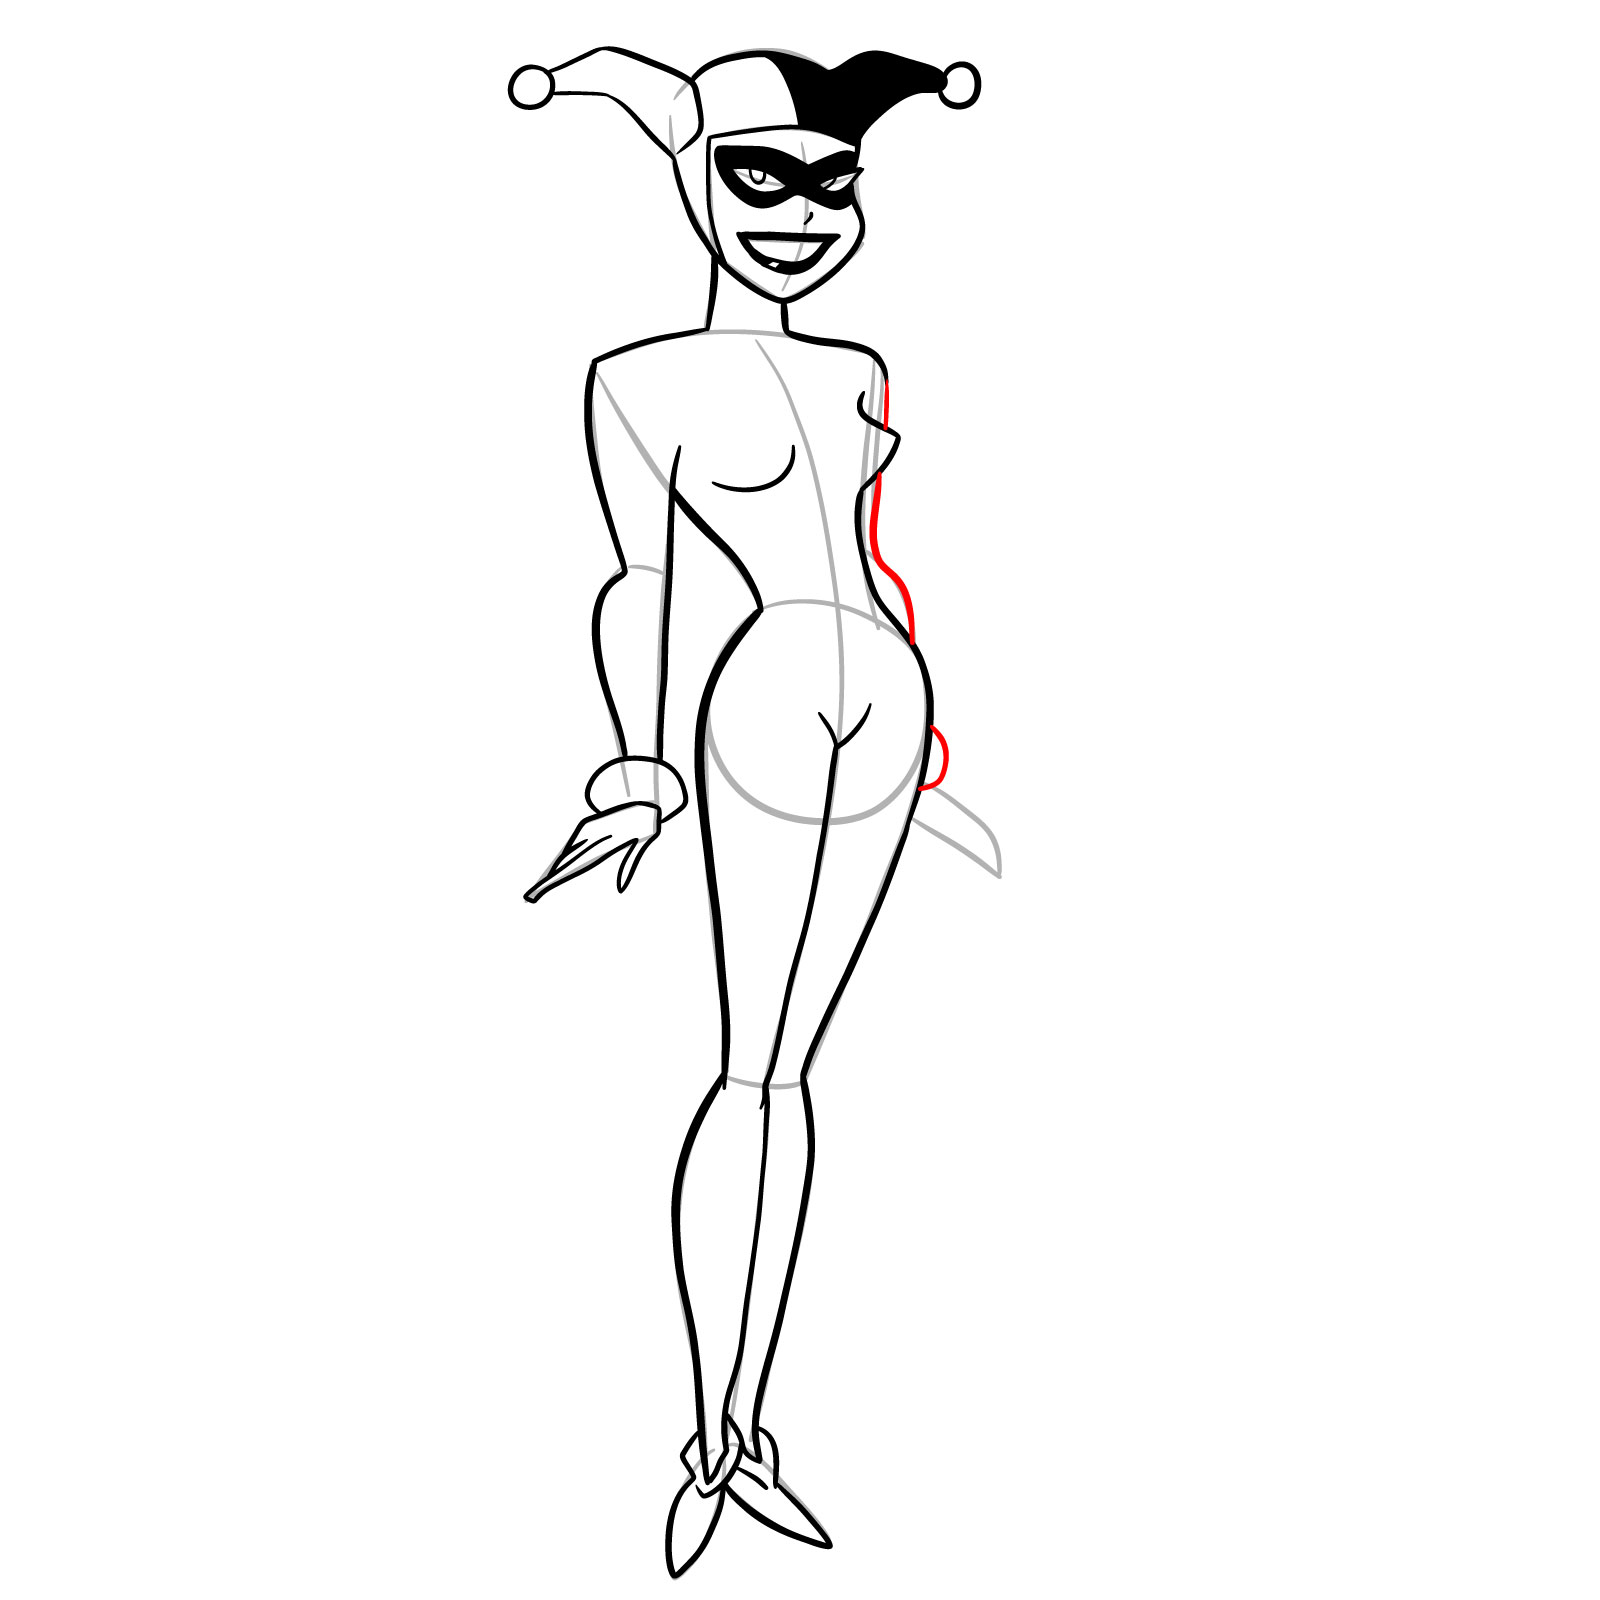 How to draw Harley Quinn in a classic suit - step 20